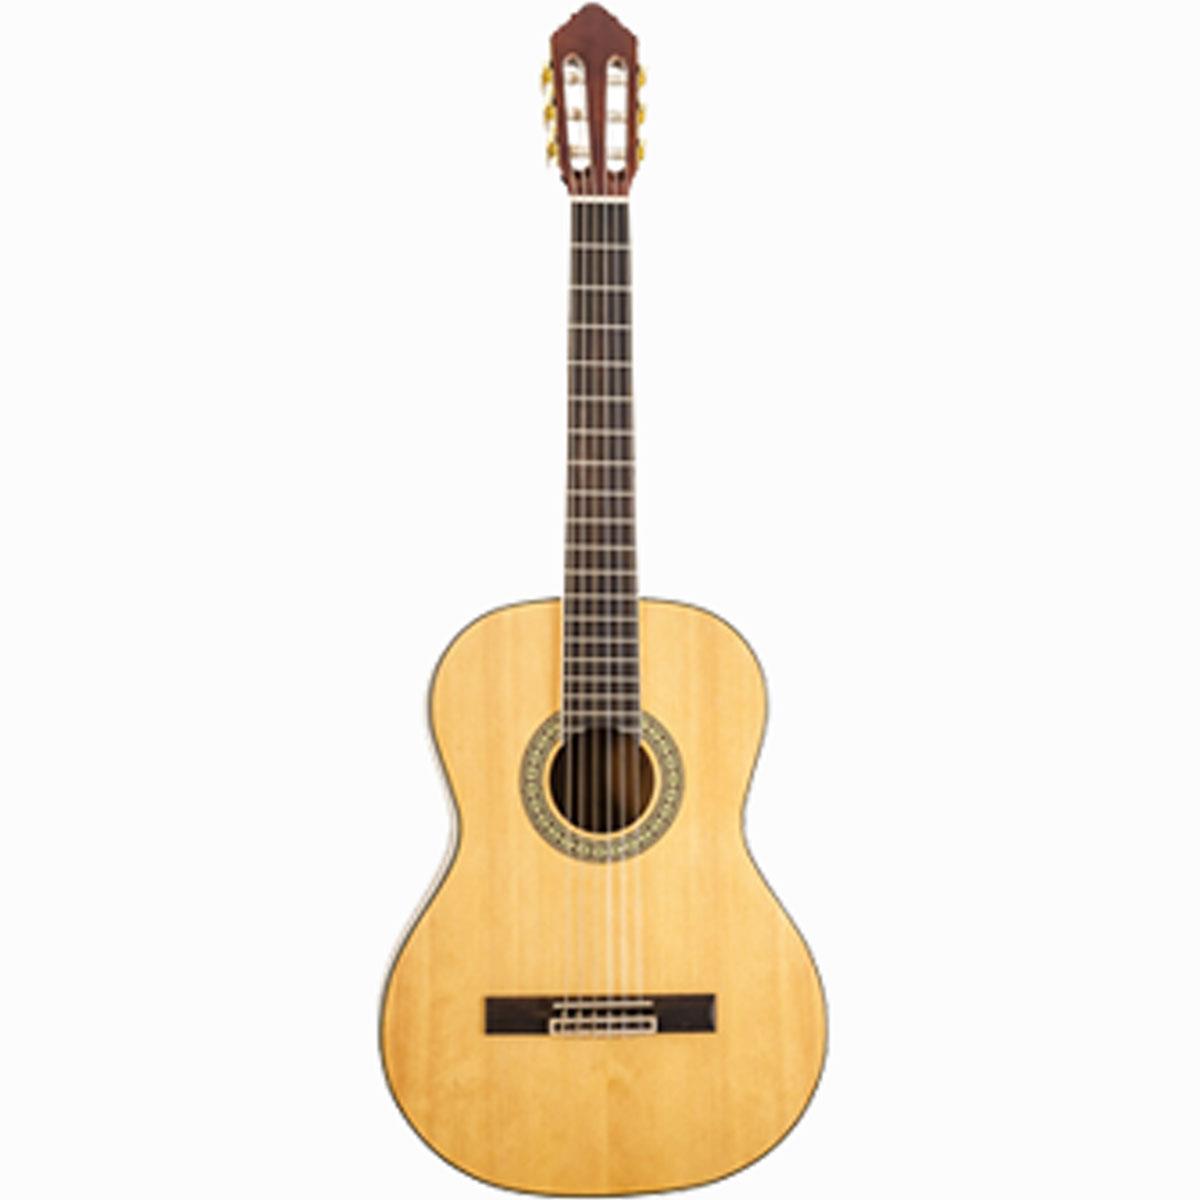 Peavey Delta Woods CNS-3/4 Size Classical Nylon String Acoustic Guitar -  03620350